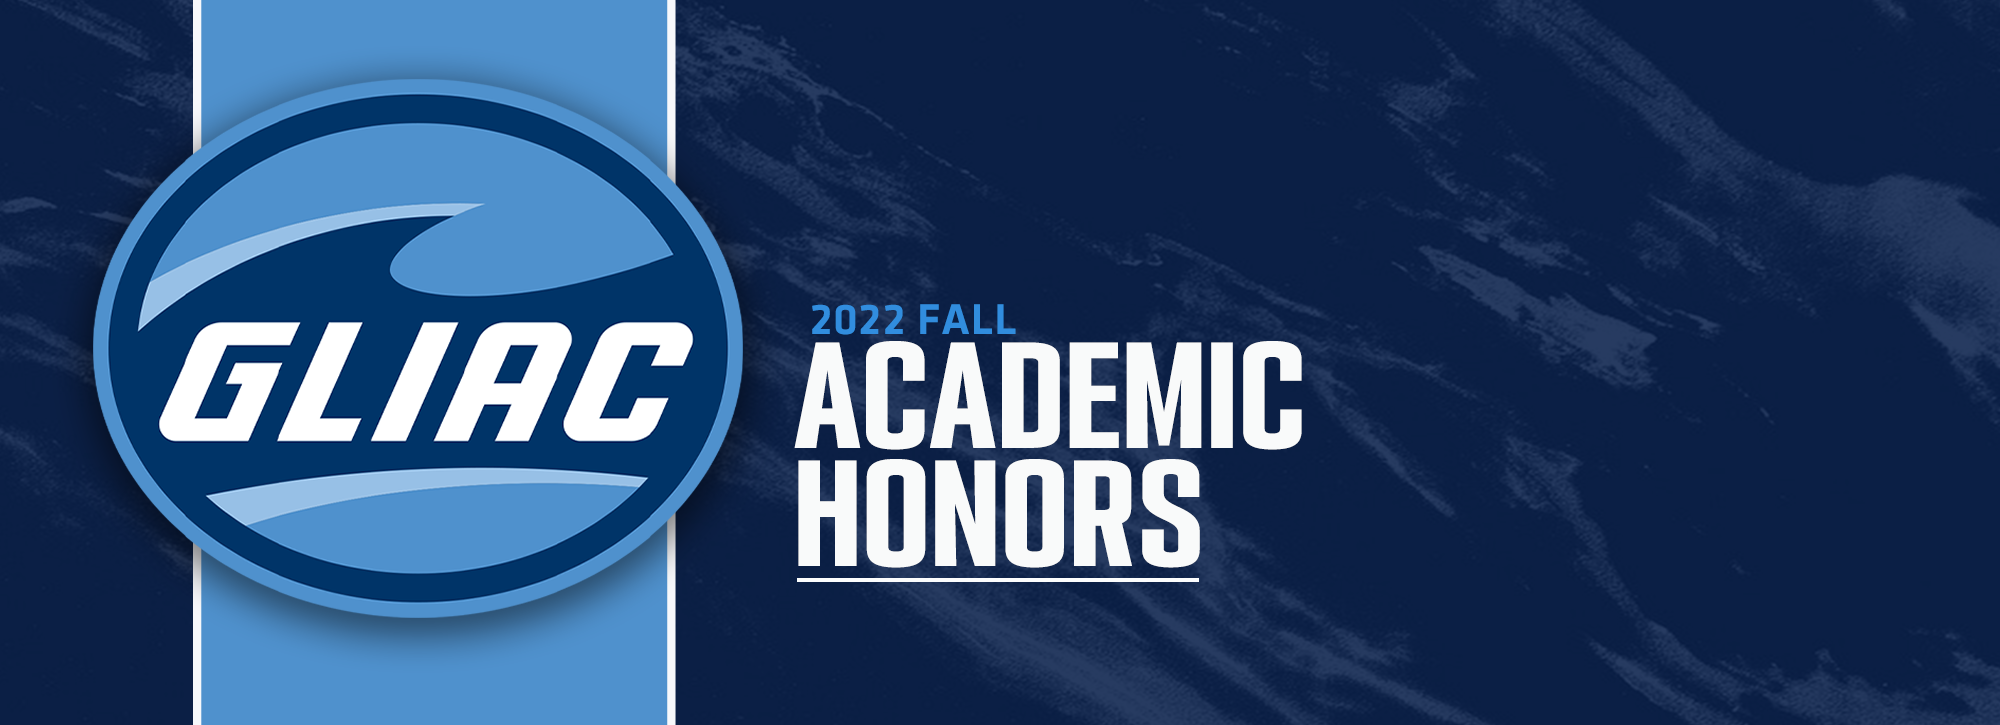 GLIAC recognizes All-Academic and All-Excellence honorees for Fall 2022